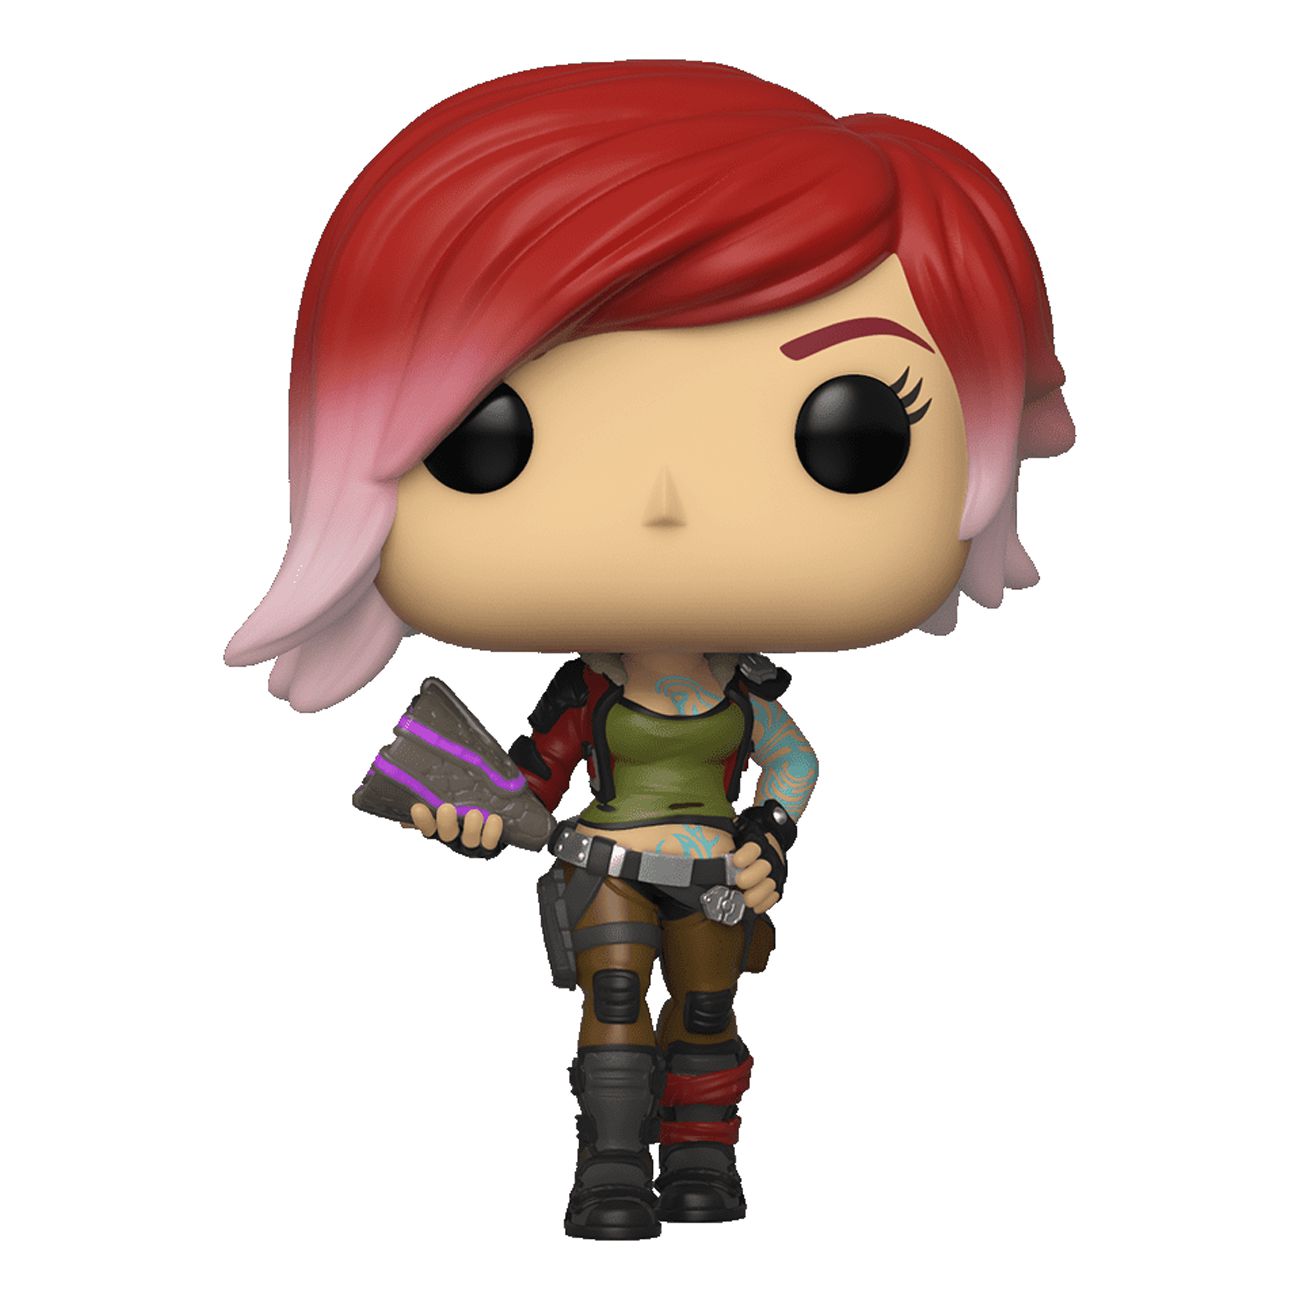 Funko POP! Games: Borderlands 3 - Lilith the Siren - image 1 of 2